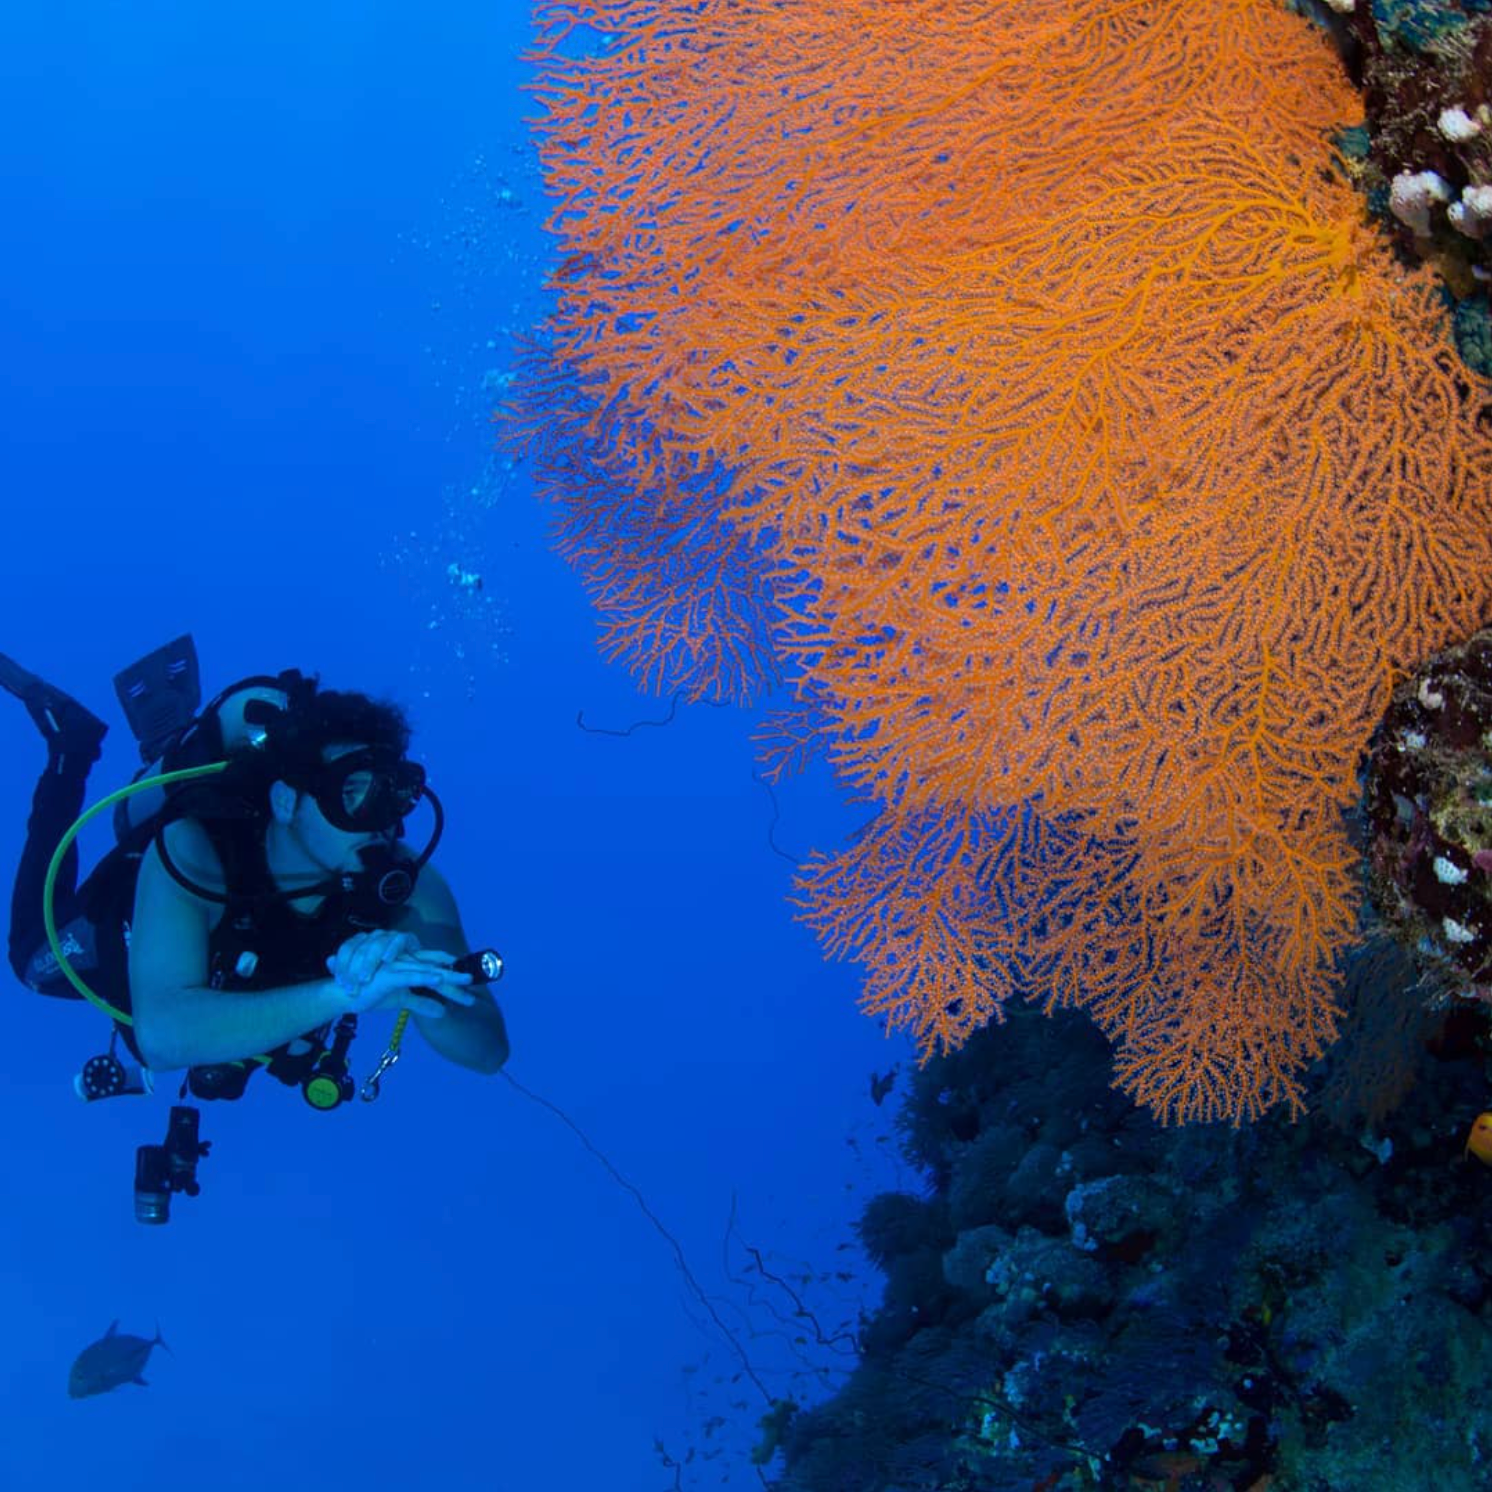 Saudi’s shores abound with beautiful reefs, making snorkelling and scuba diving a must